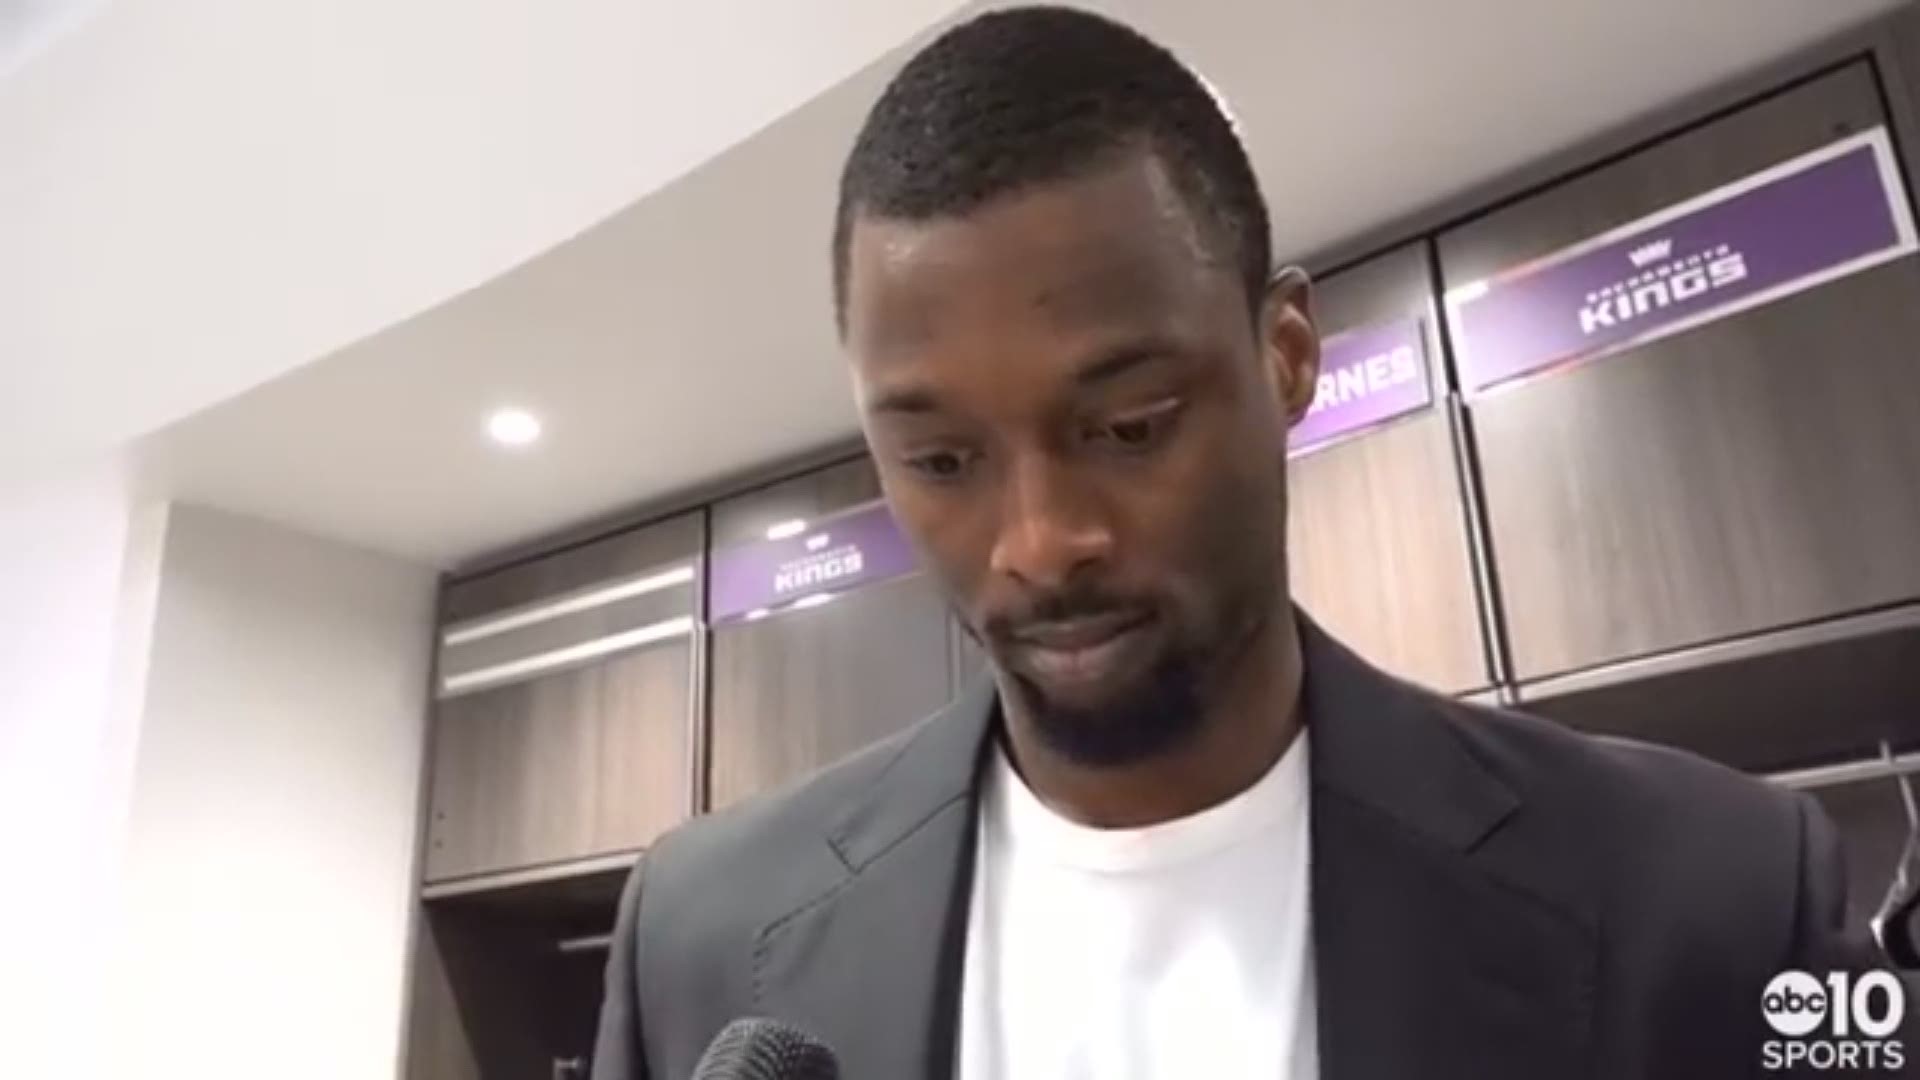 Kings forward Harrison Barnes talks about Monday's 115-108 victory over the New York Knicks to snap a three-game losing streak, his double-double performance and the comfort level he has with only nine games since joining Sacramento.

Barnes also discusses why he's chosen to be a voice in the community following the decision by Sacramento County District Attorney to not press charges on the police officers who shot and killed an unarmed Stephon Clark last year.